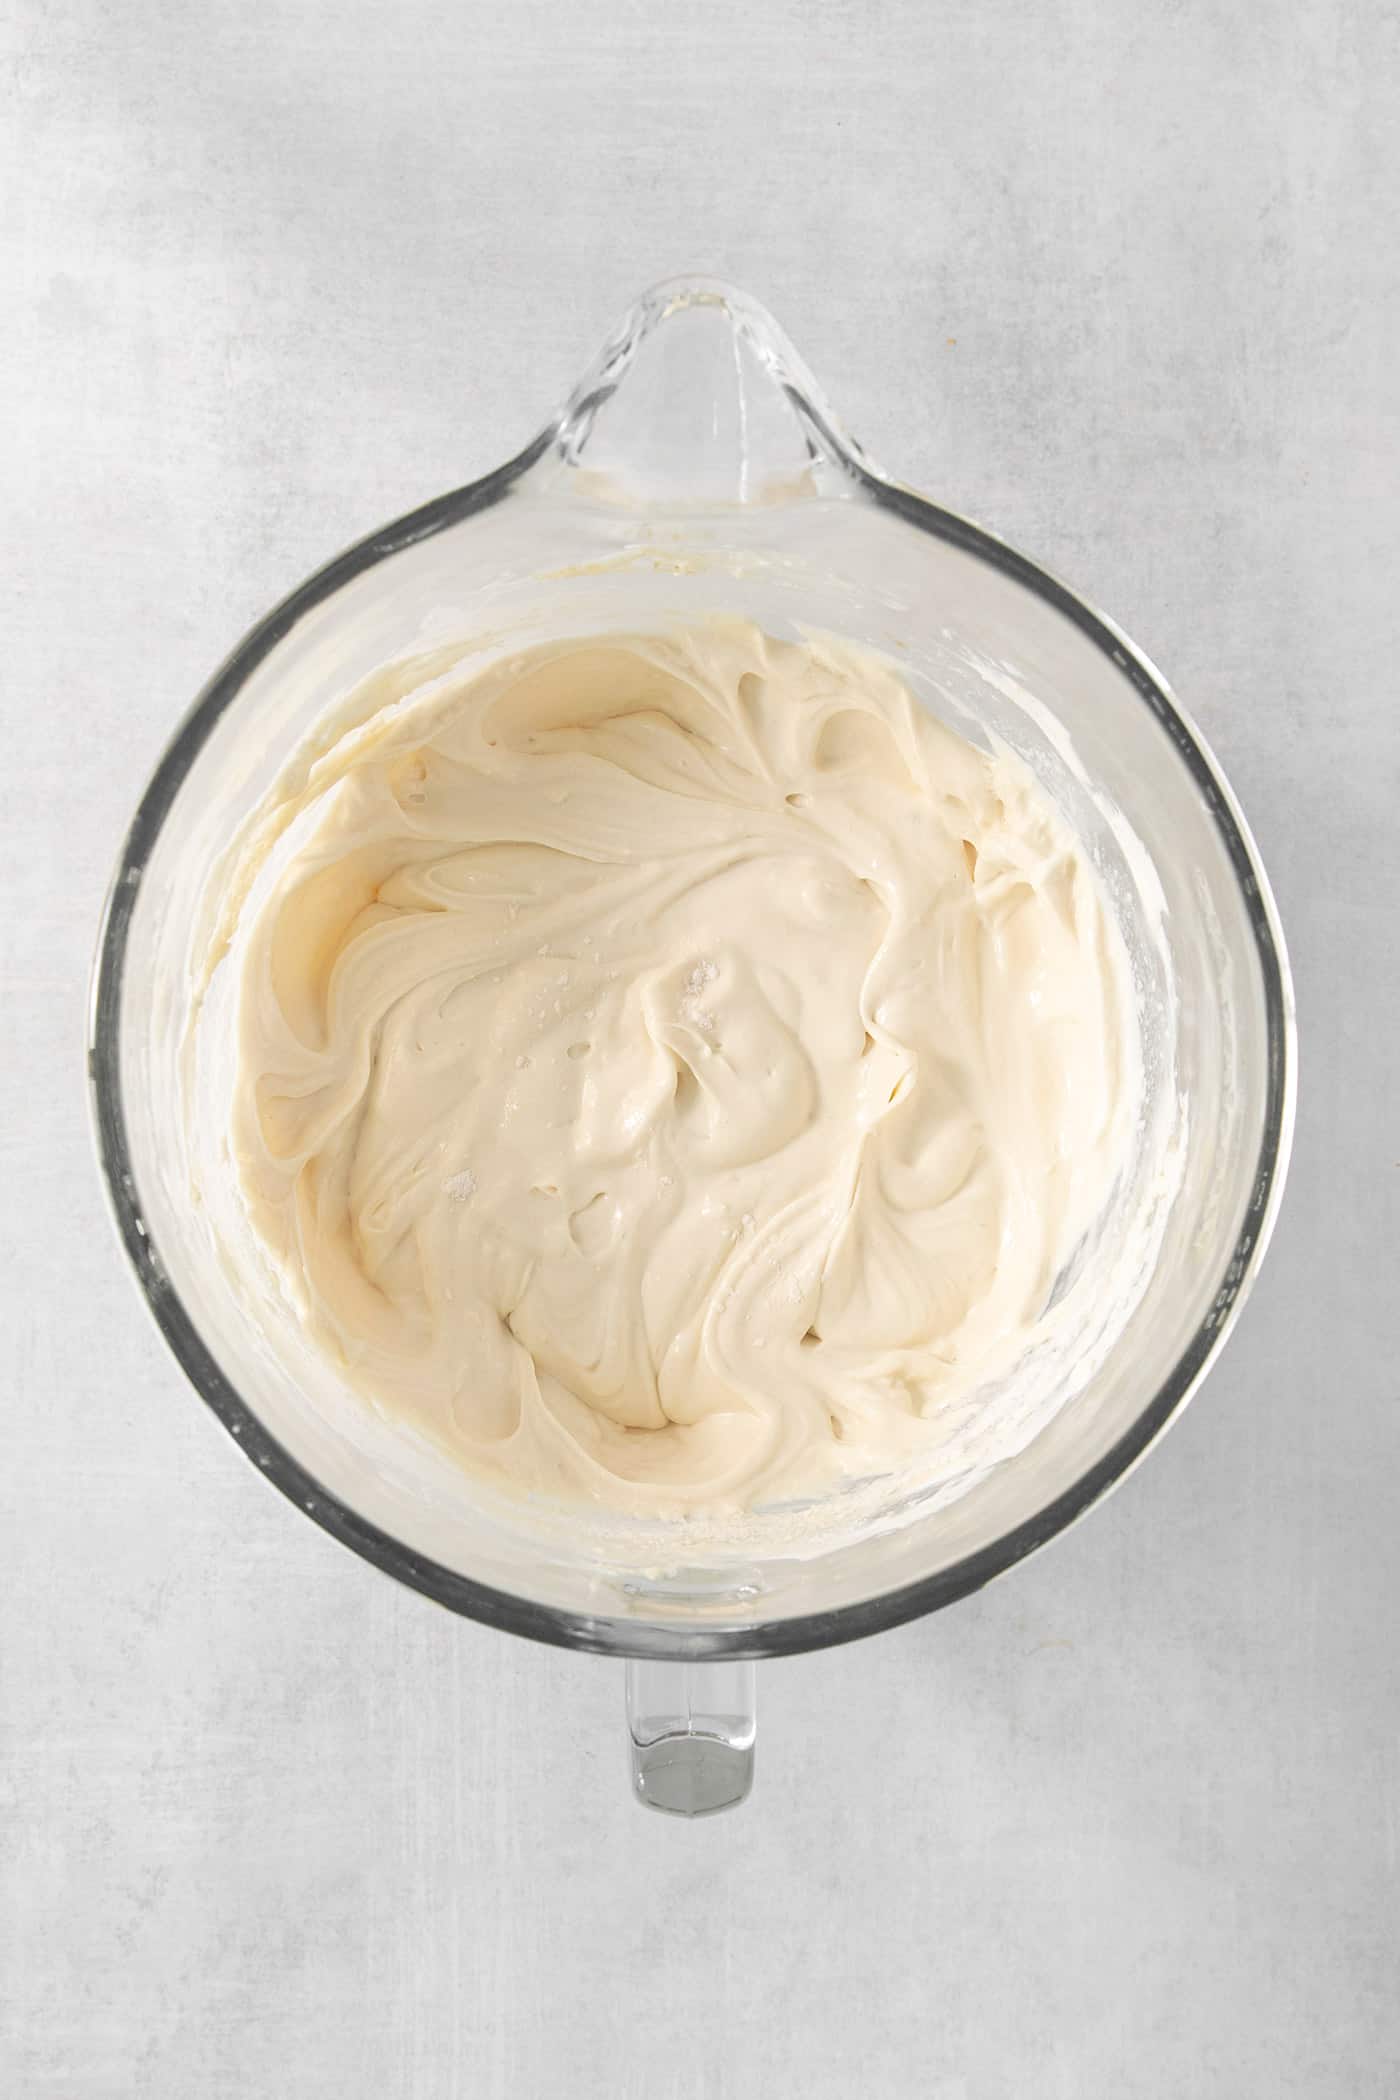 A bowl of cheesecake batter.